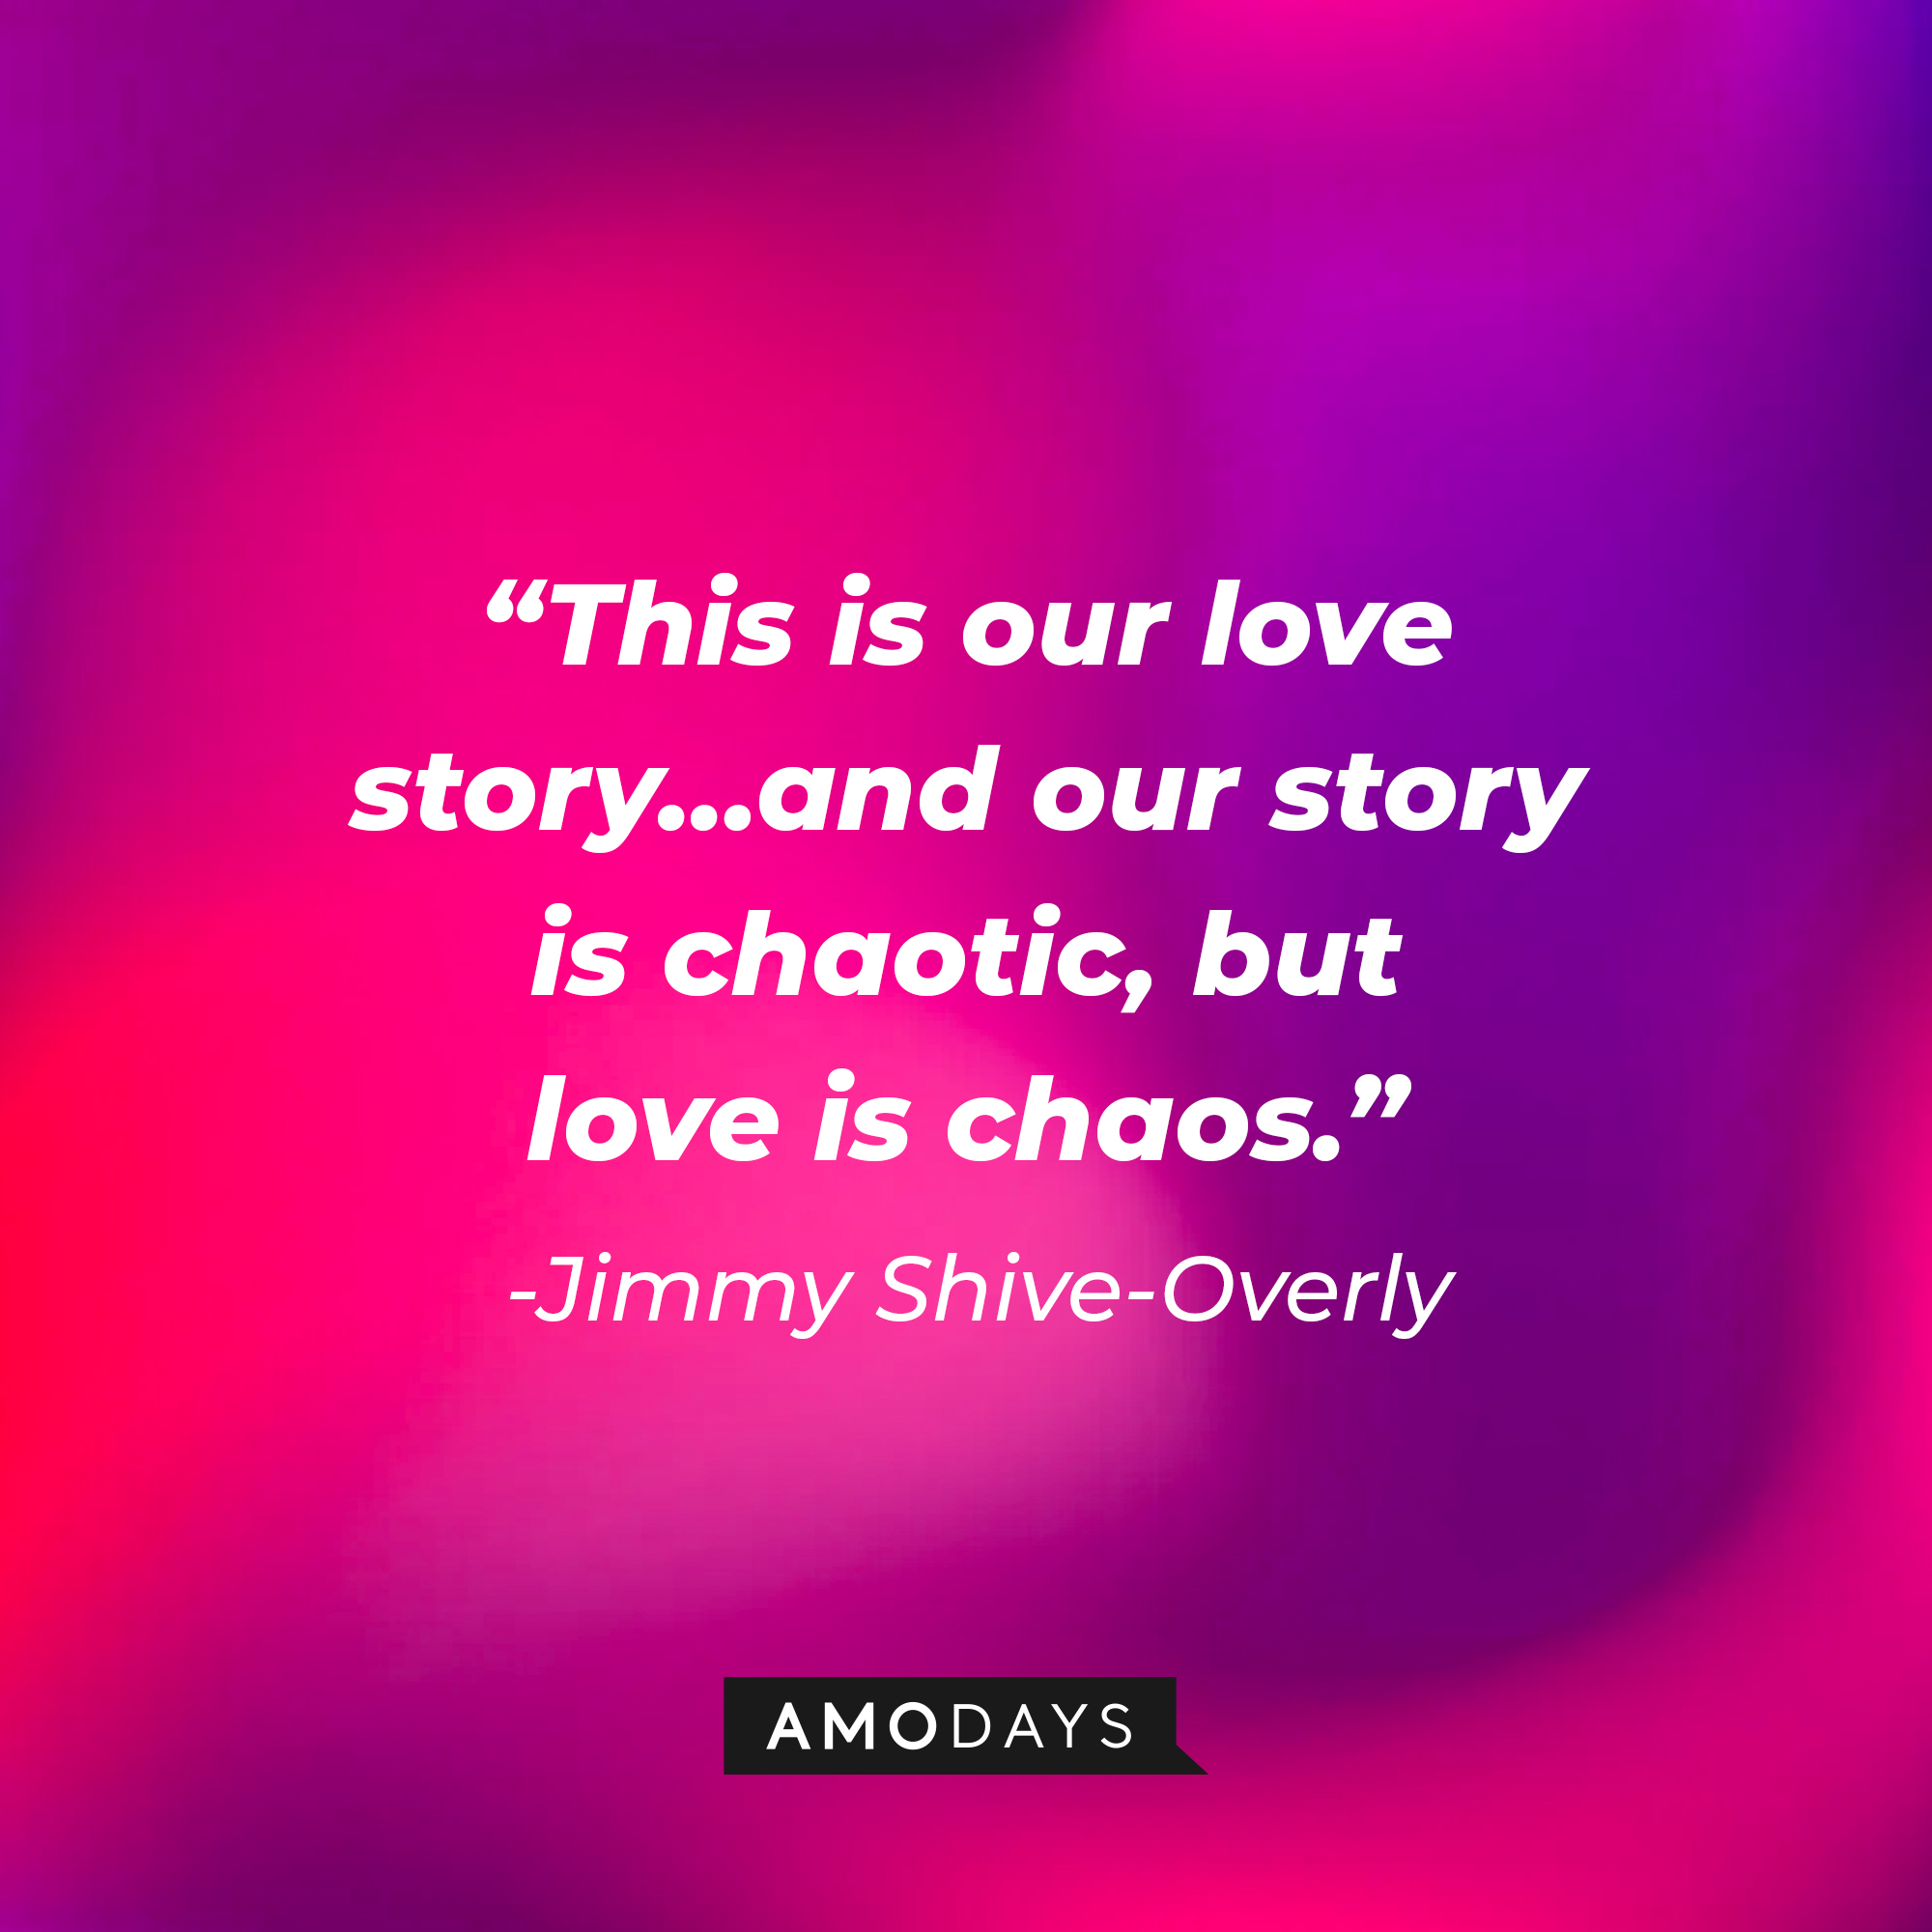 Jimmy Shive-Overly’s quote: “This is our love story… and our story is chaotic, but love is chaos.” | Source: AmoDays